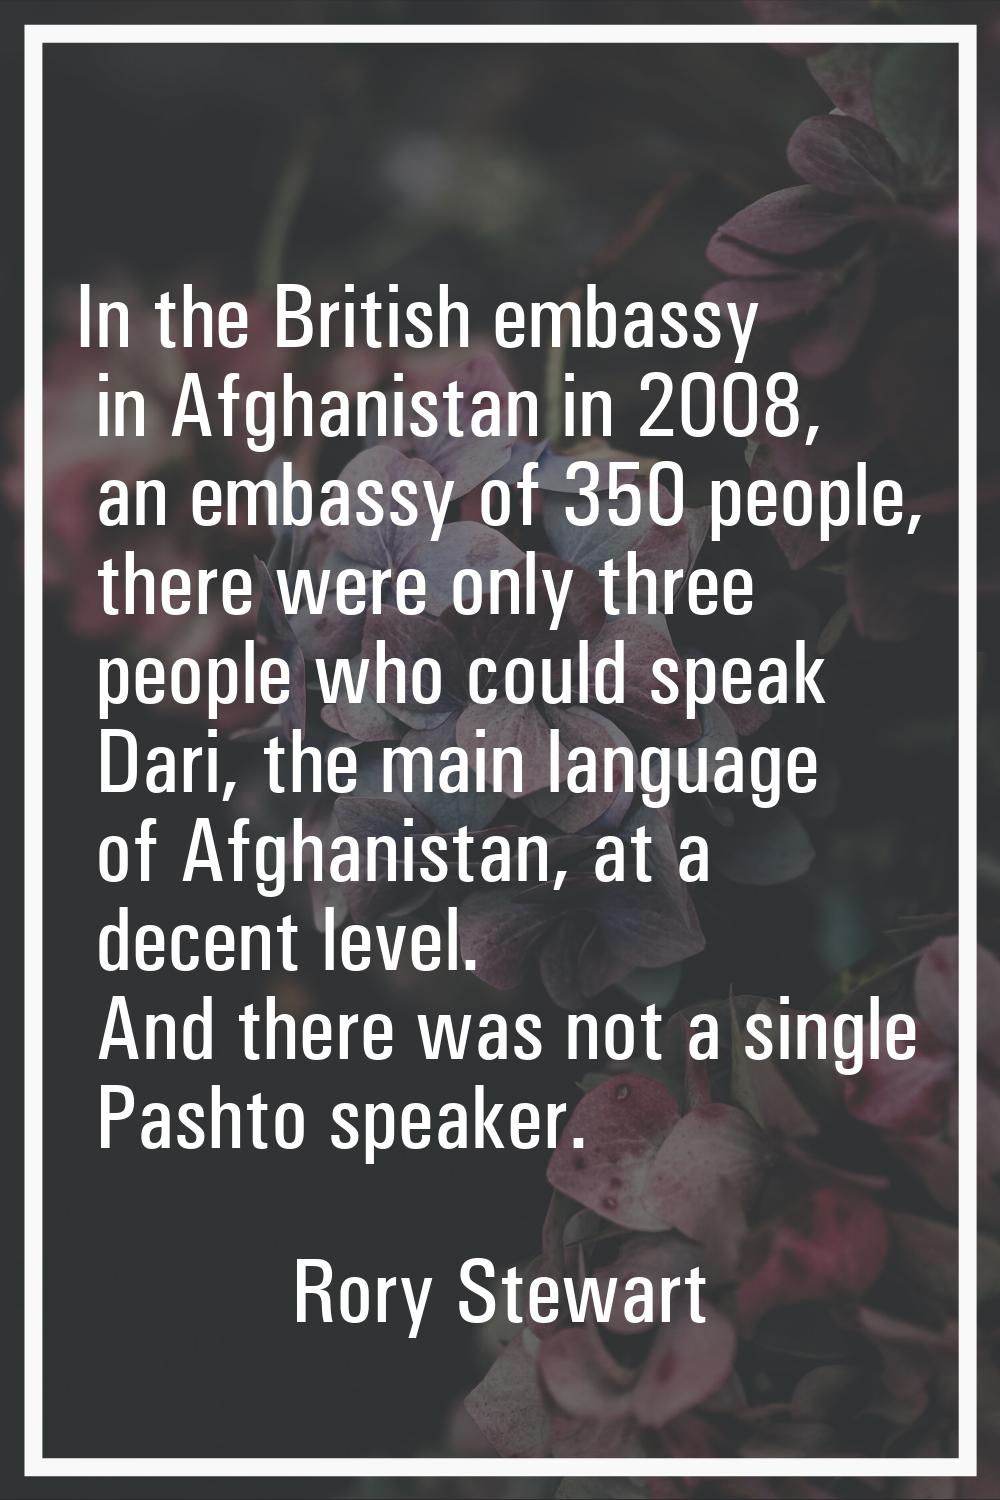 In the British embassy in Afghanistan in 2008, an embassy of 350 people, there were only three peop